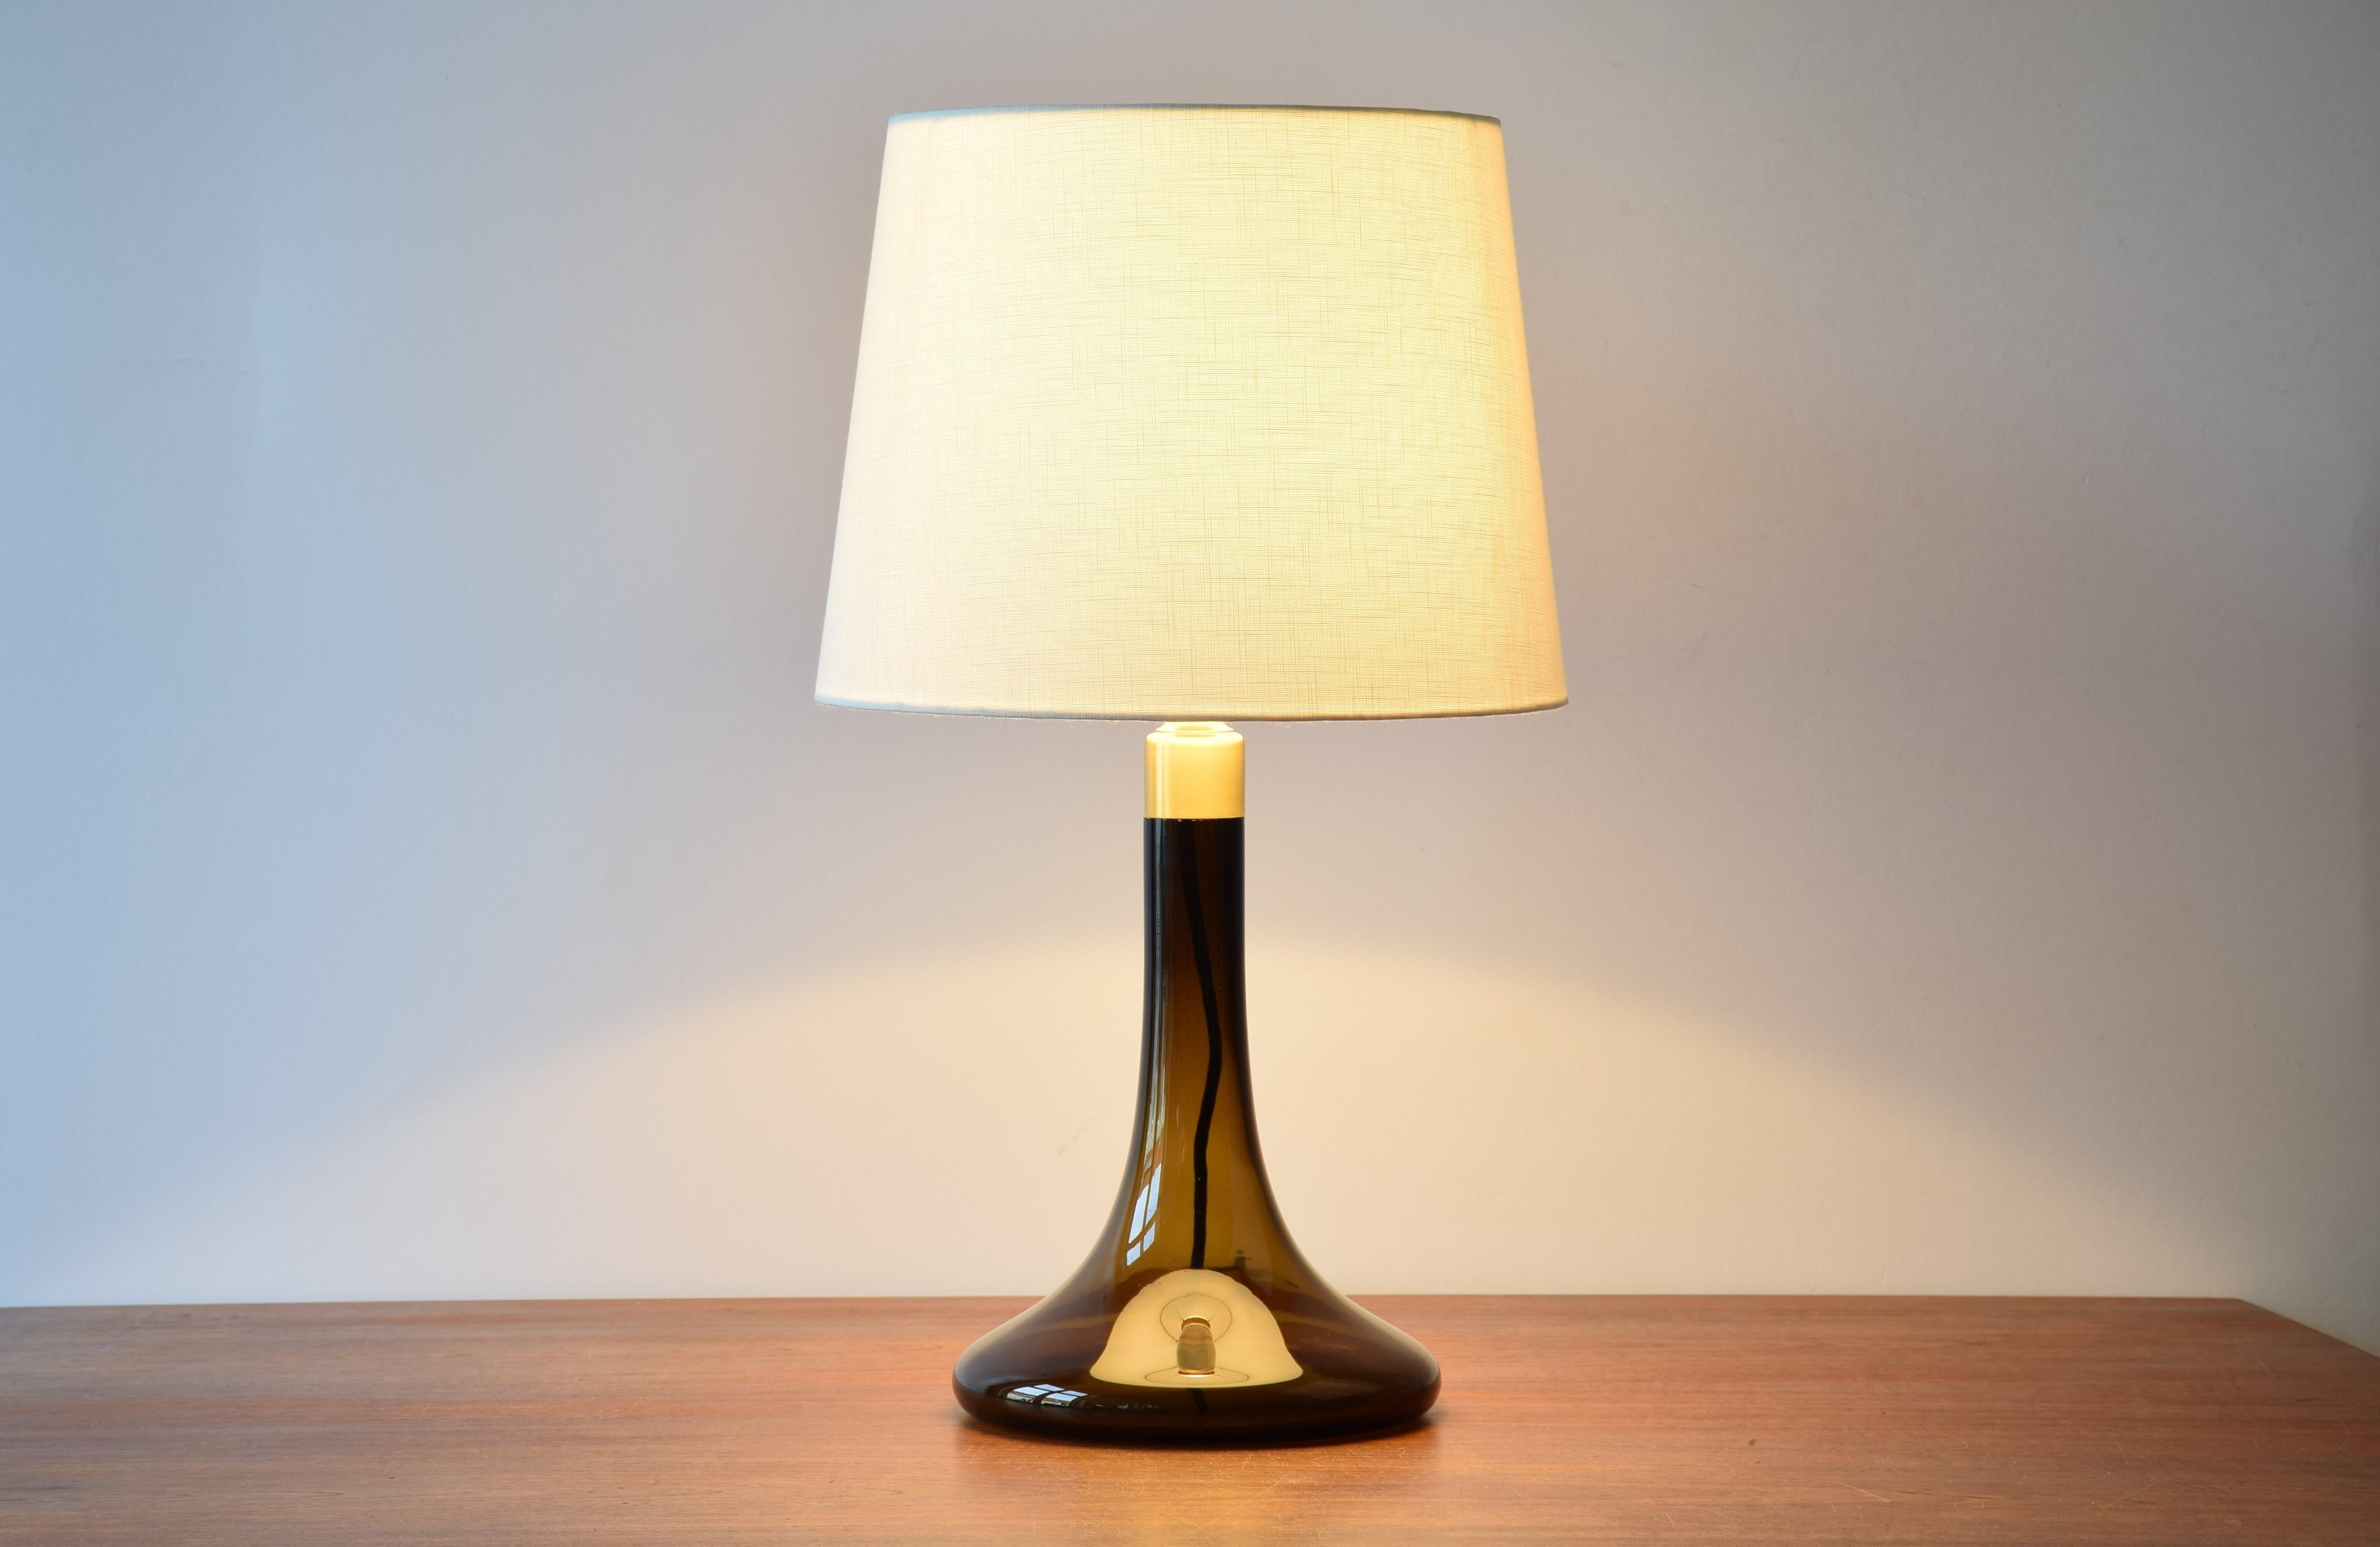 Mid-century glass table lamp model Havanna designed by Poul Christiansen for Holmegaard and Le Klint in 1979. 

The lamp is made of brown transparent glass and has a metal top, most likely made of brass.

Included is a new lampshade designed in